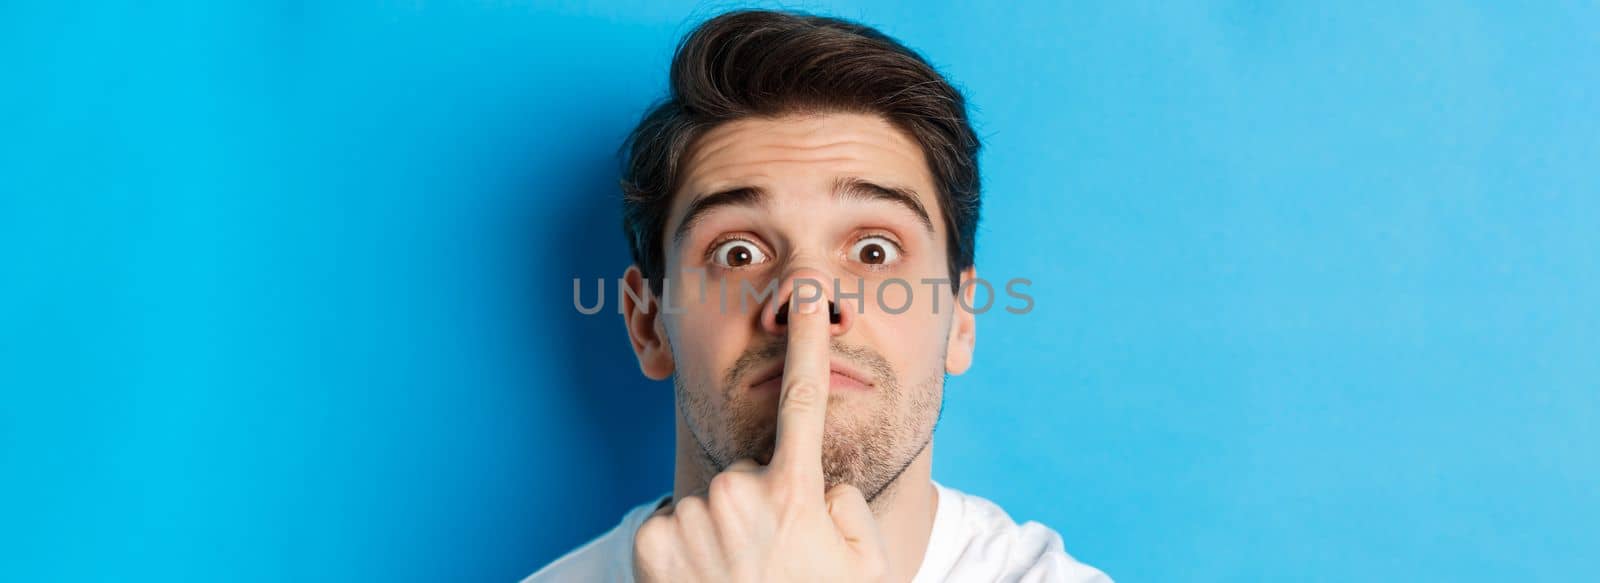 Headshot of caucasian guy making funny expressions, standing over blue background.